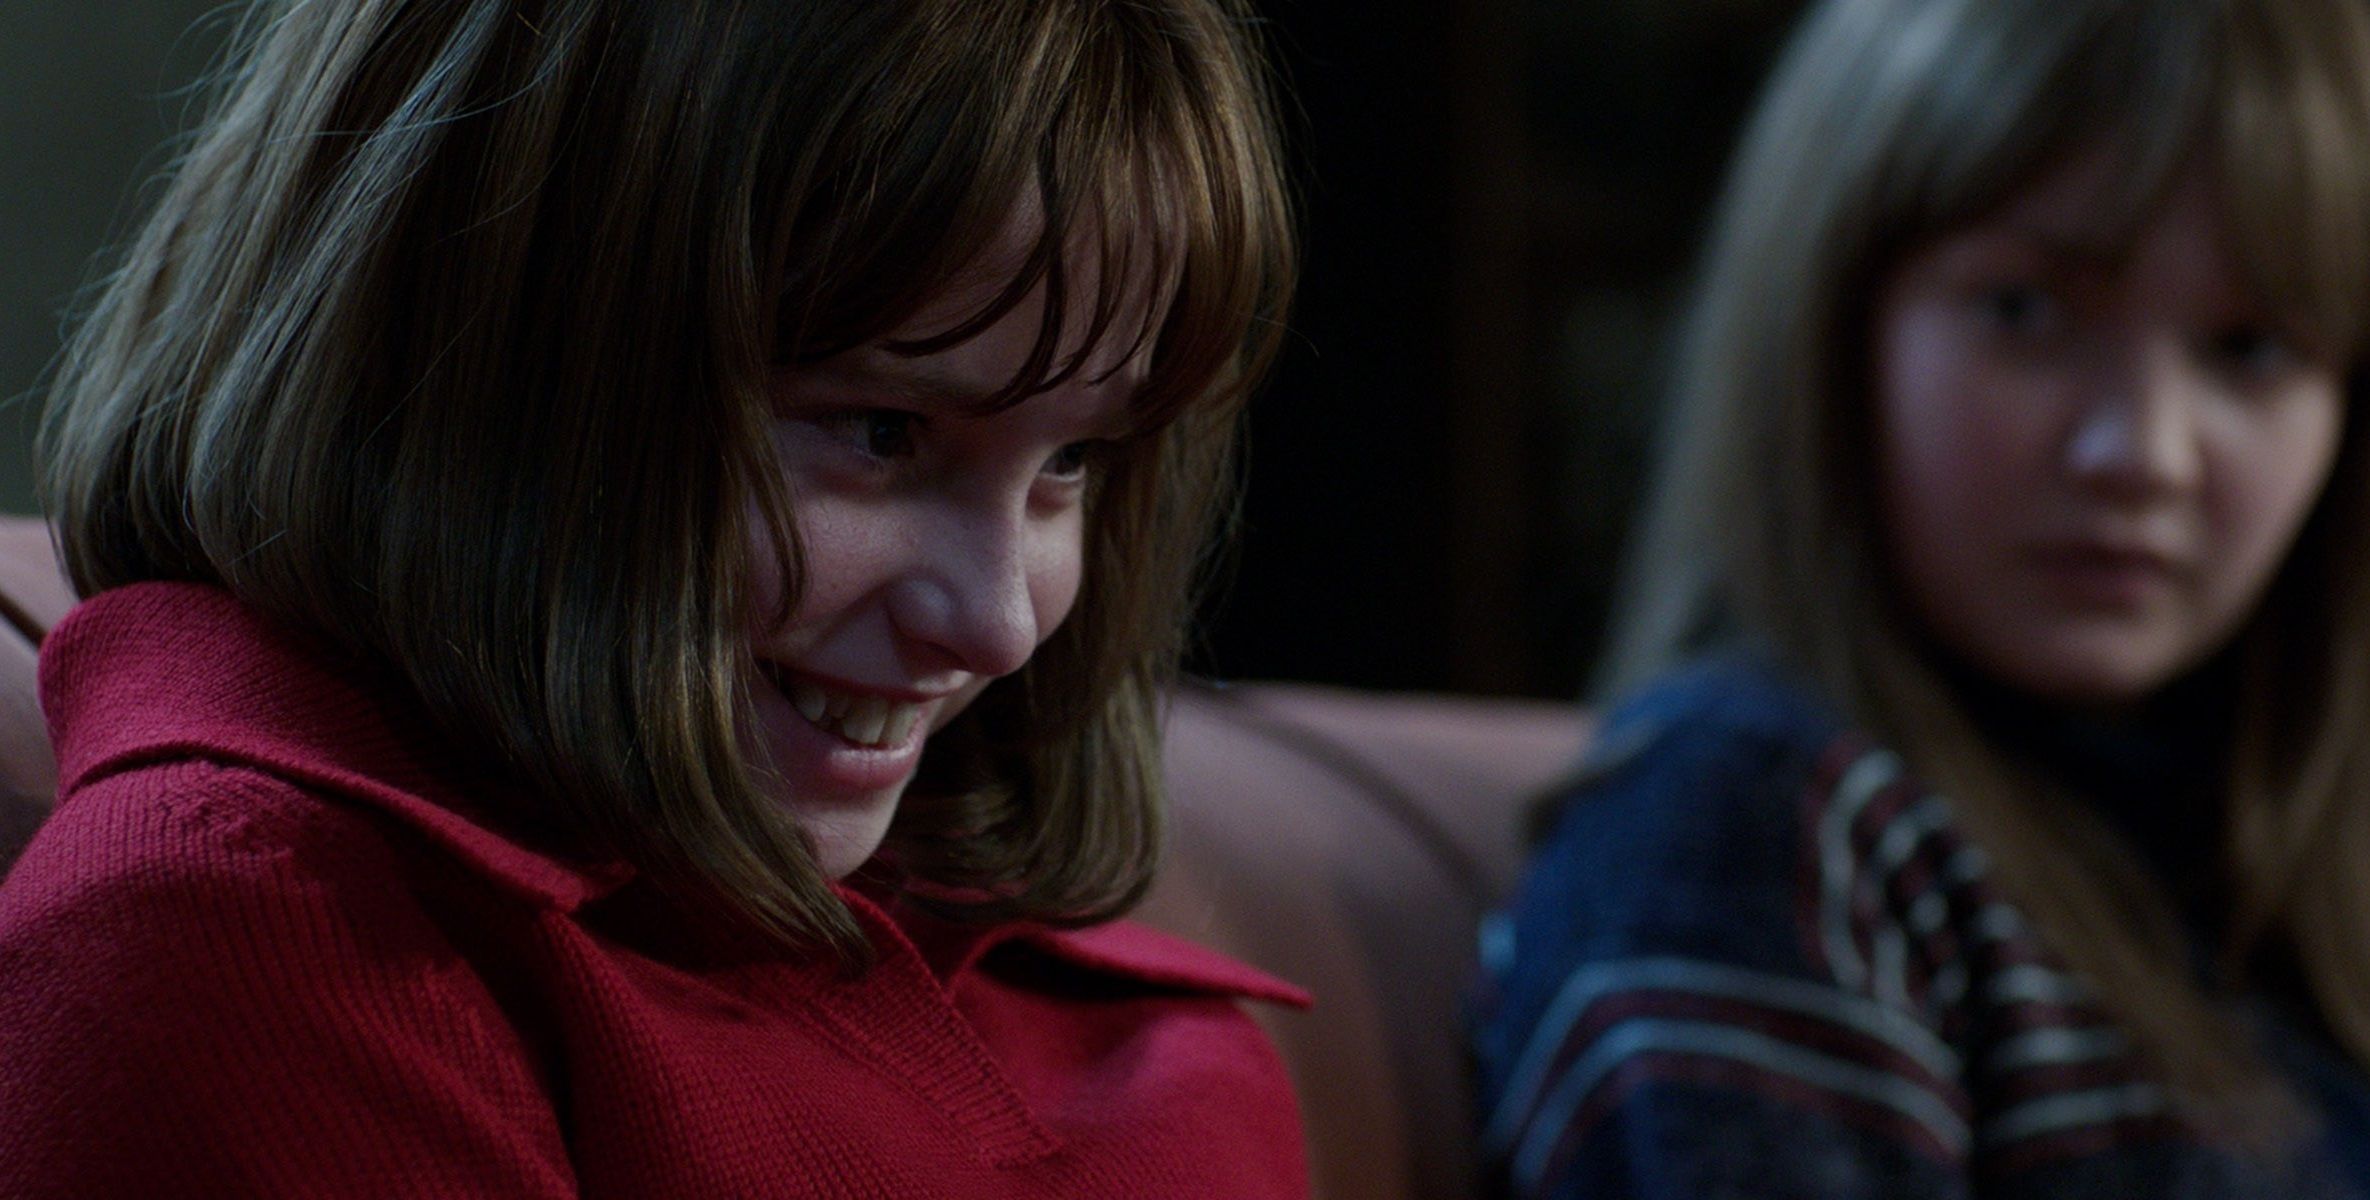 The Conjuring 2 HD Wallpaper 2 Madison Wolfe, HD